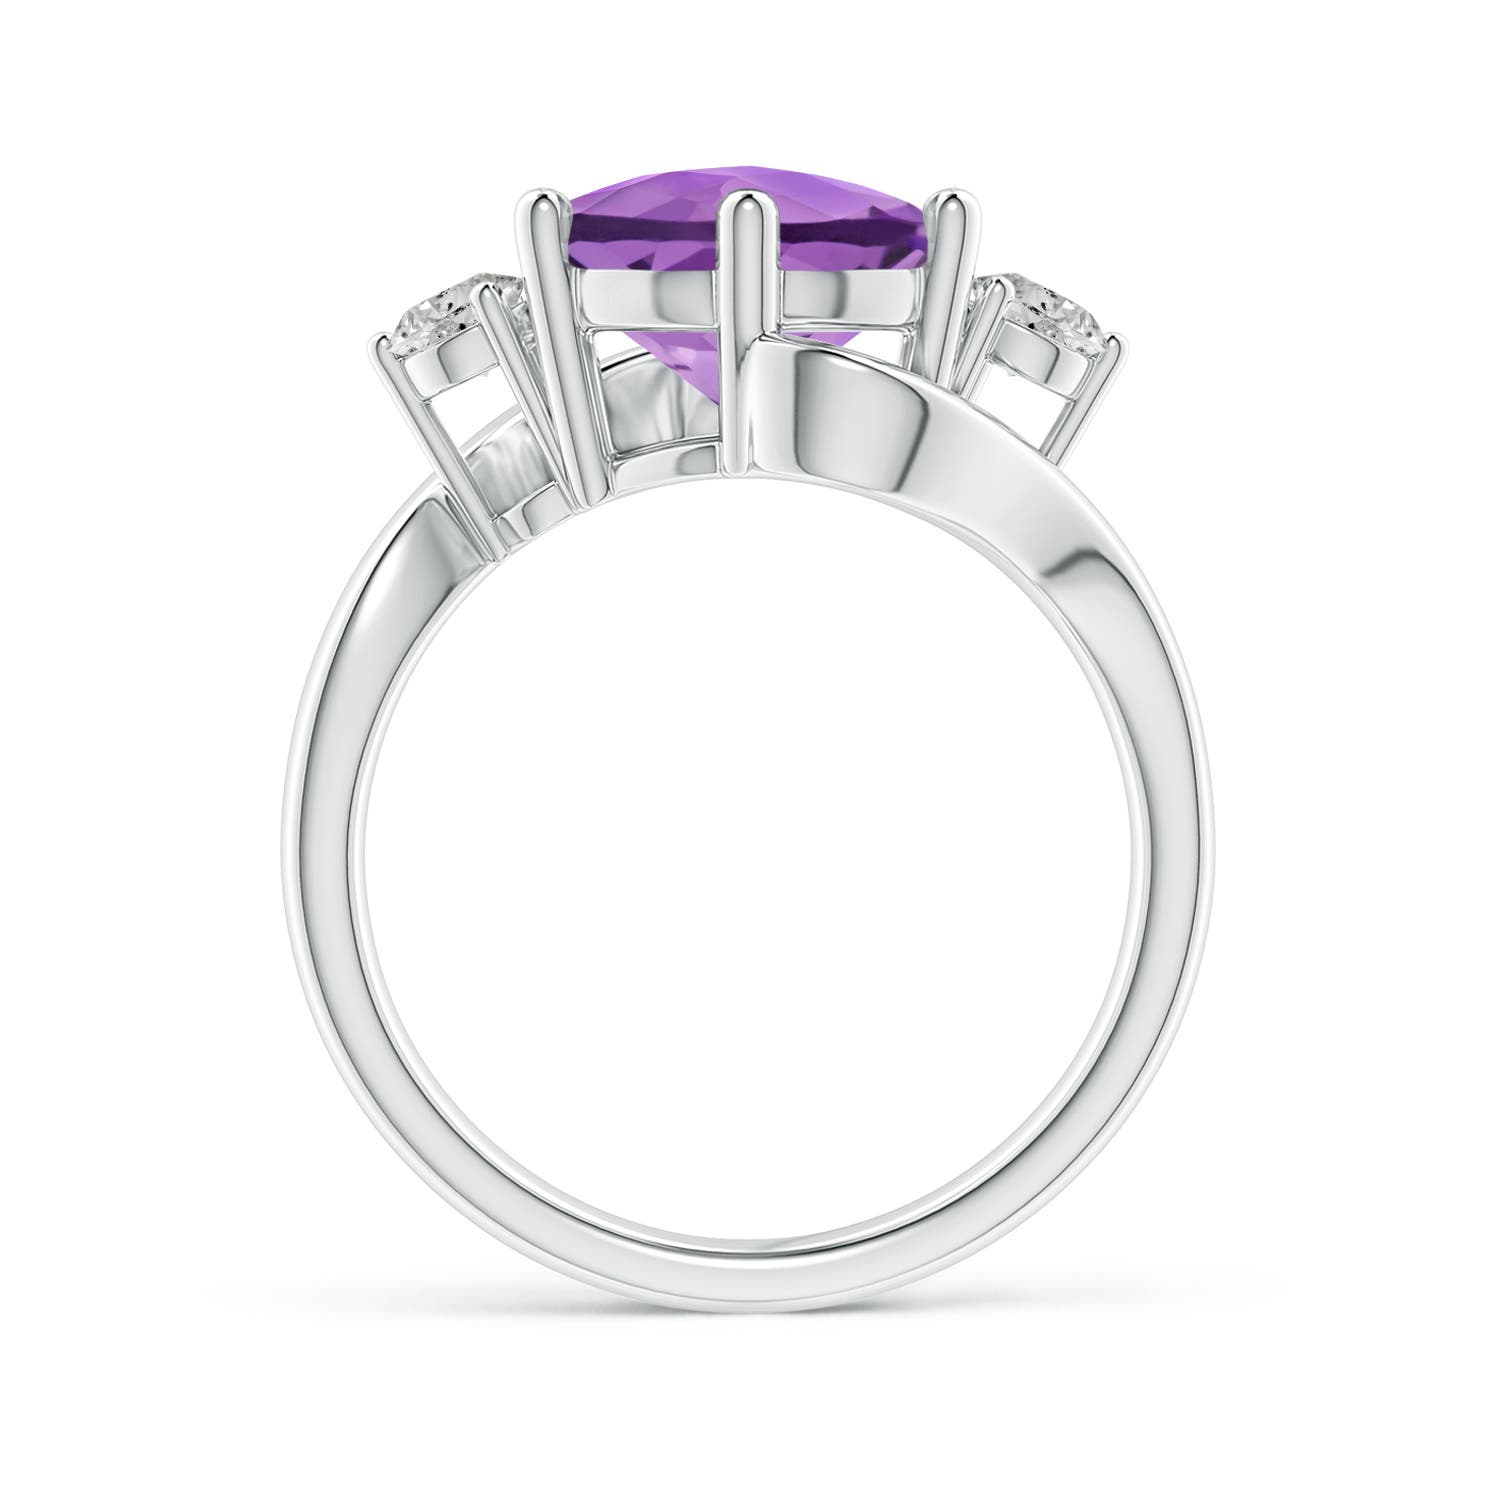 A - Amethyst / 4.04 CT / 14 KT White Gold